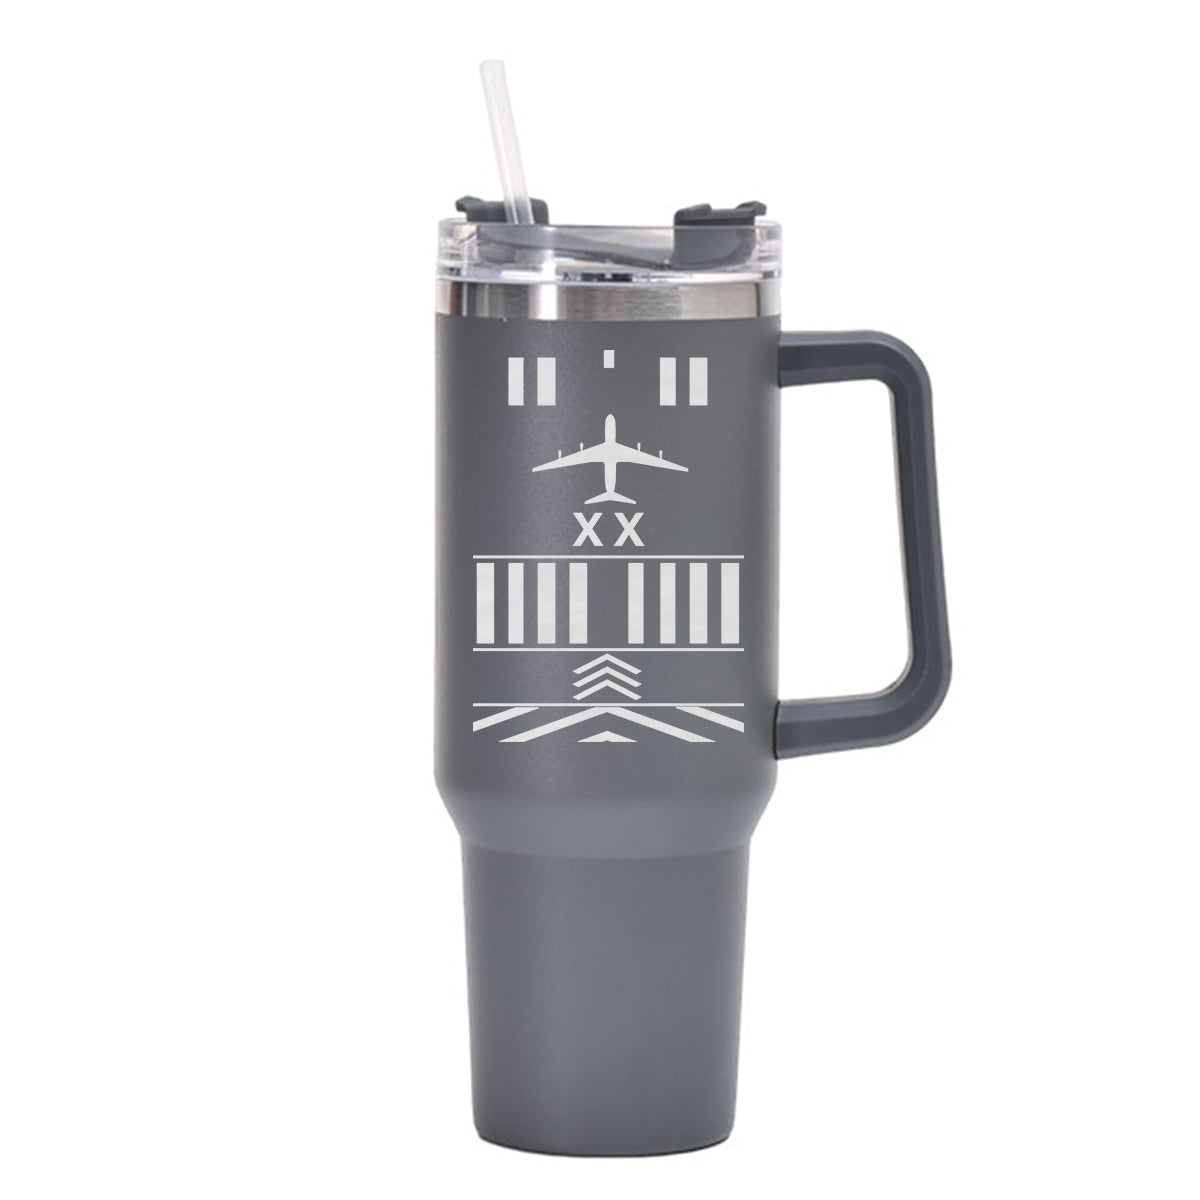 Products Runway (Customizable) Designed 40oz Stainless Steel Car Mug With Holder